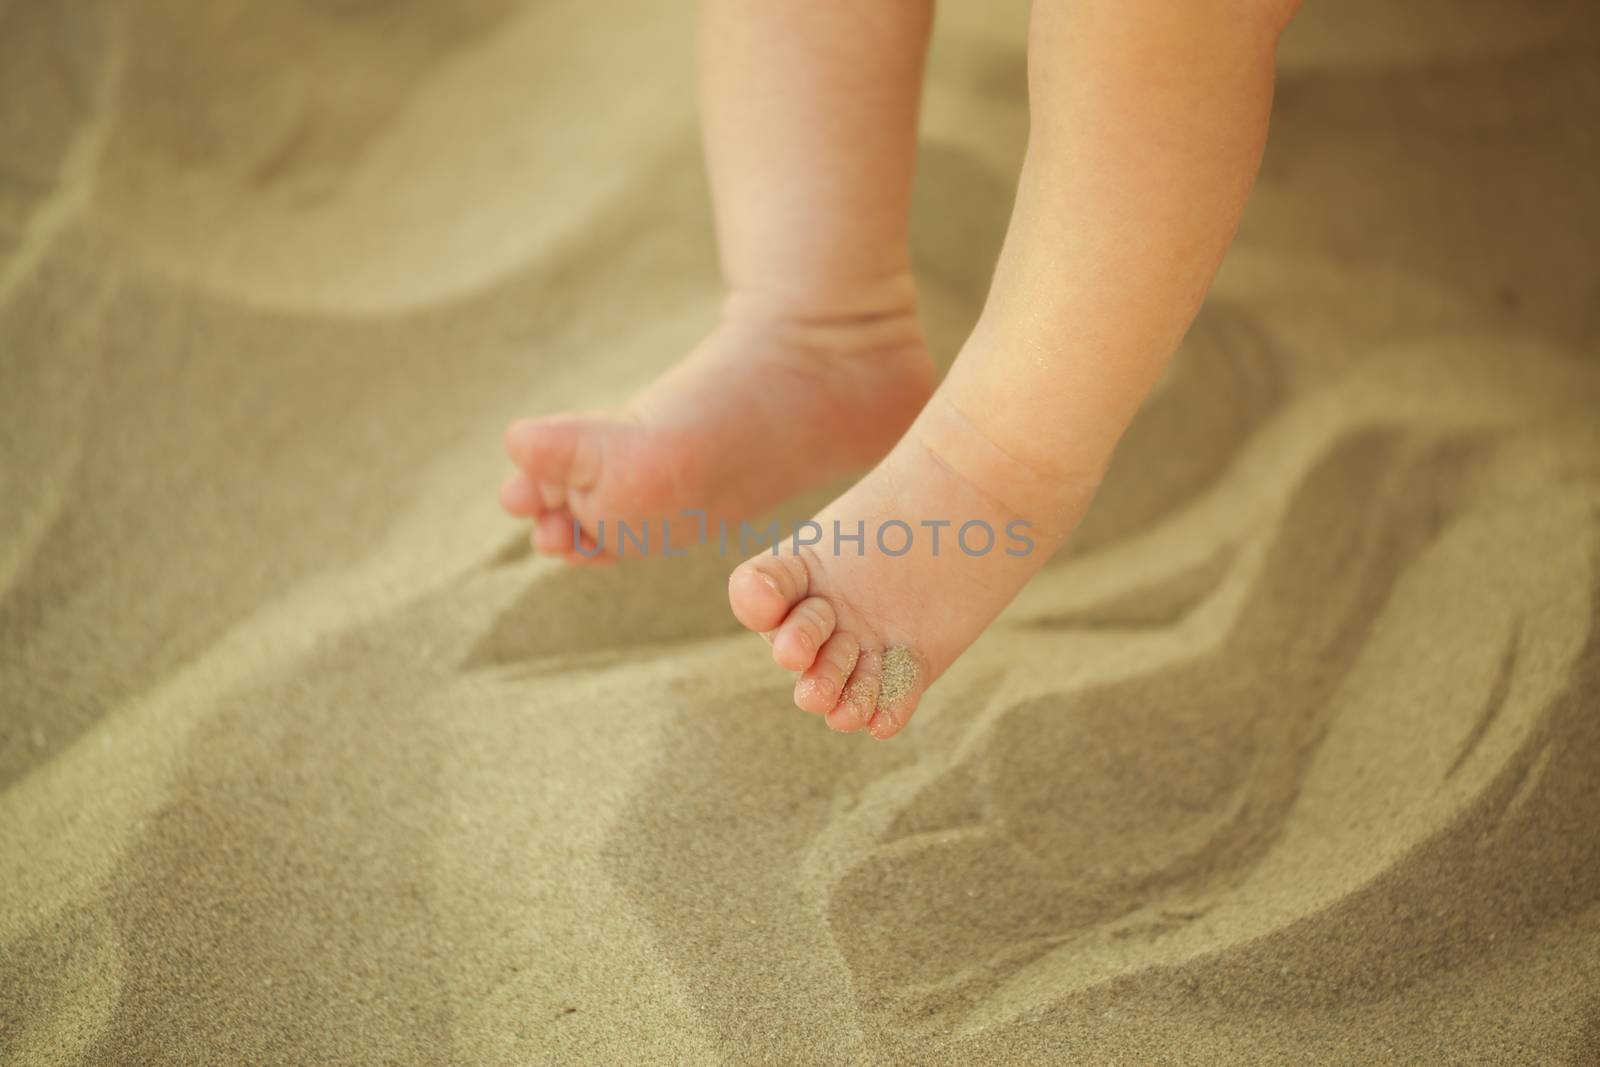 Newborn baby feet playing in the sand in summertime